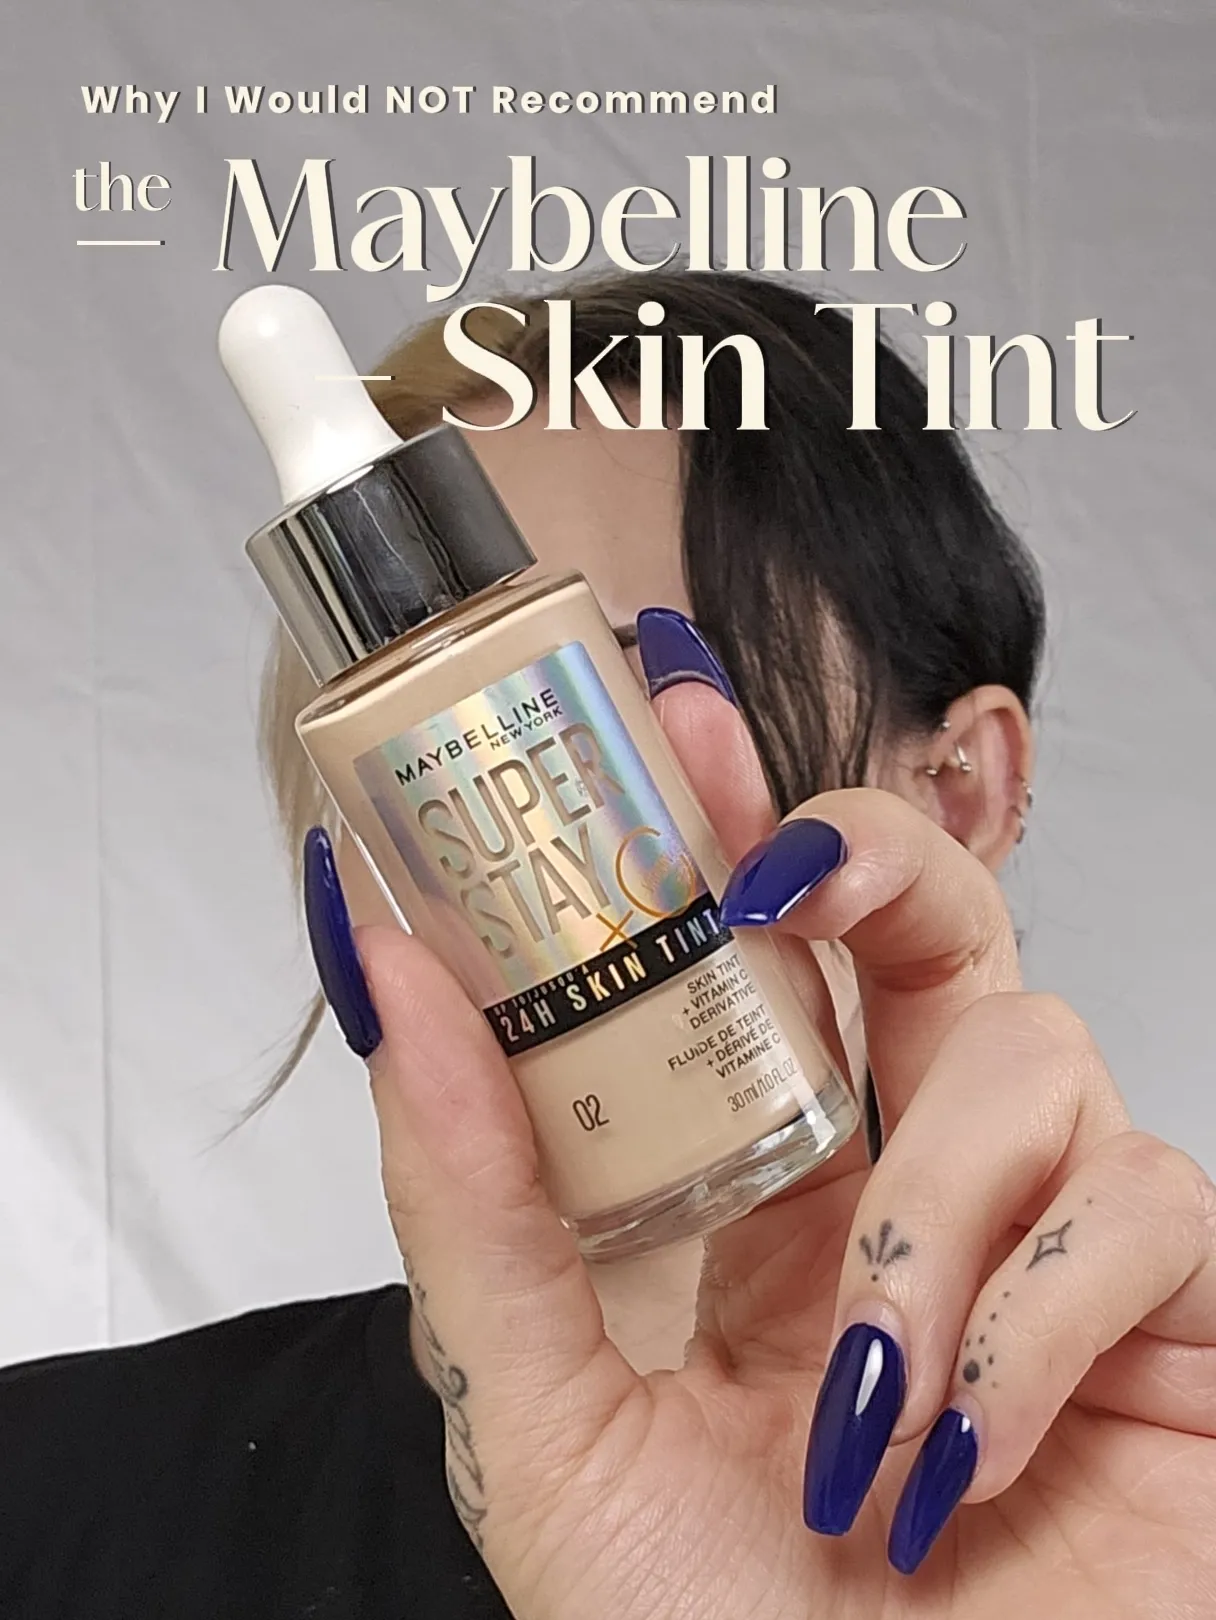  Maybelline New York Super Stay Full Coverage Liquid Foundation  Makeup, 336 Warm Bronze, 1 Fl Oz : Beauty & Personal Care